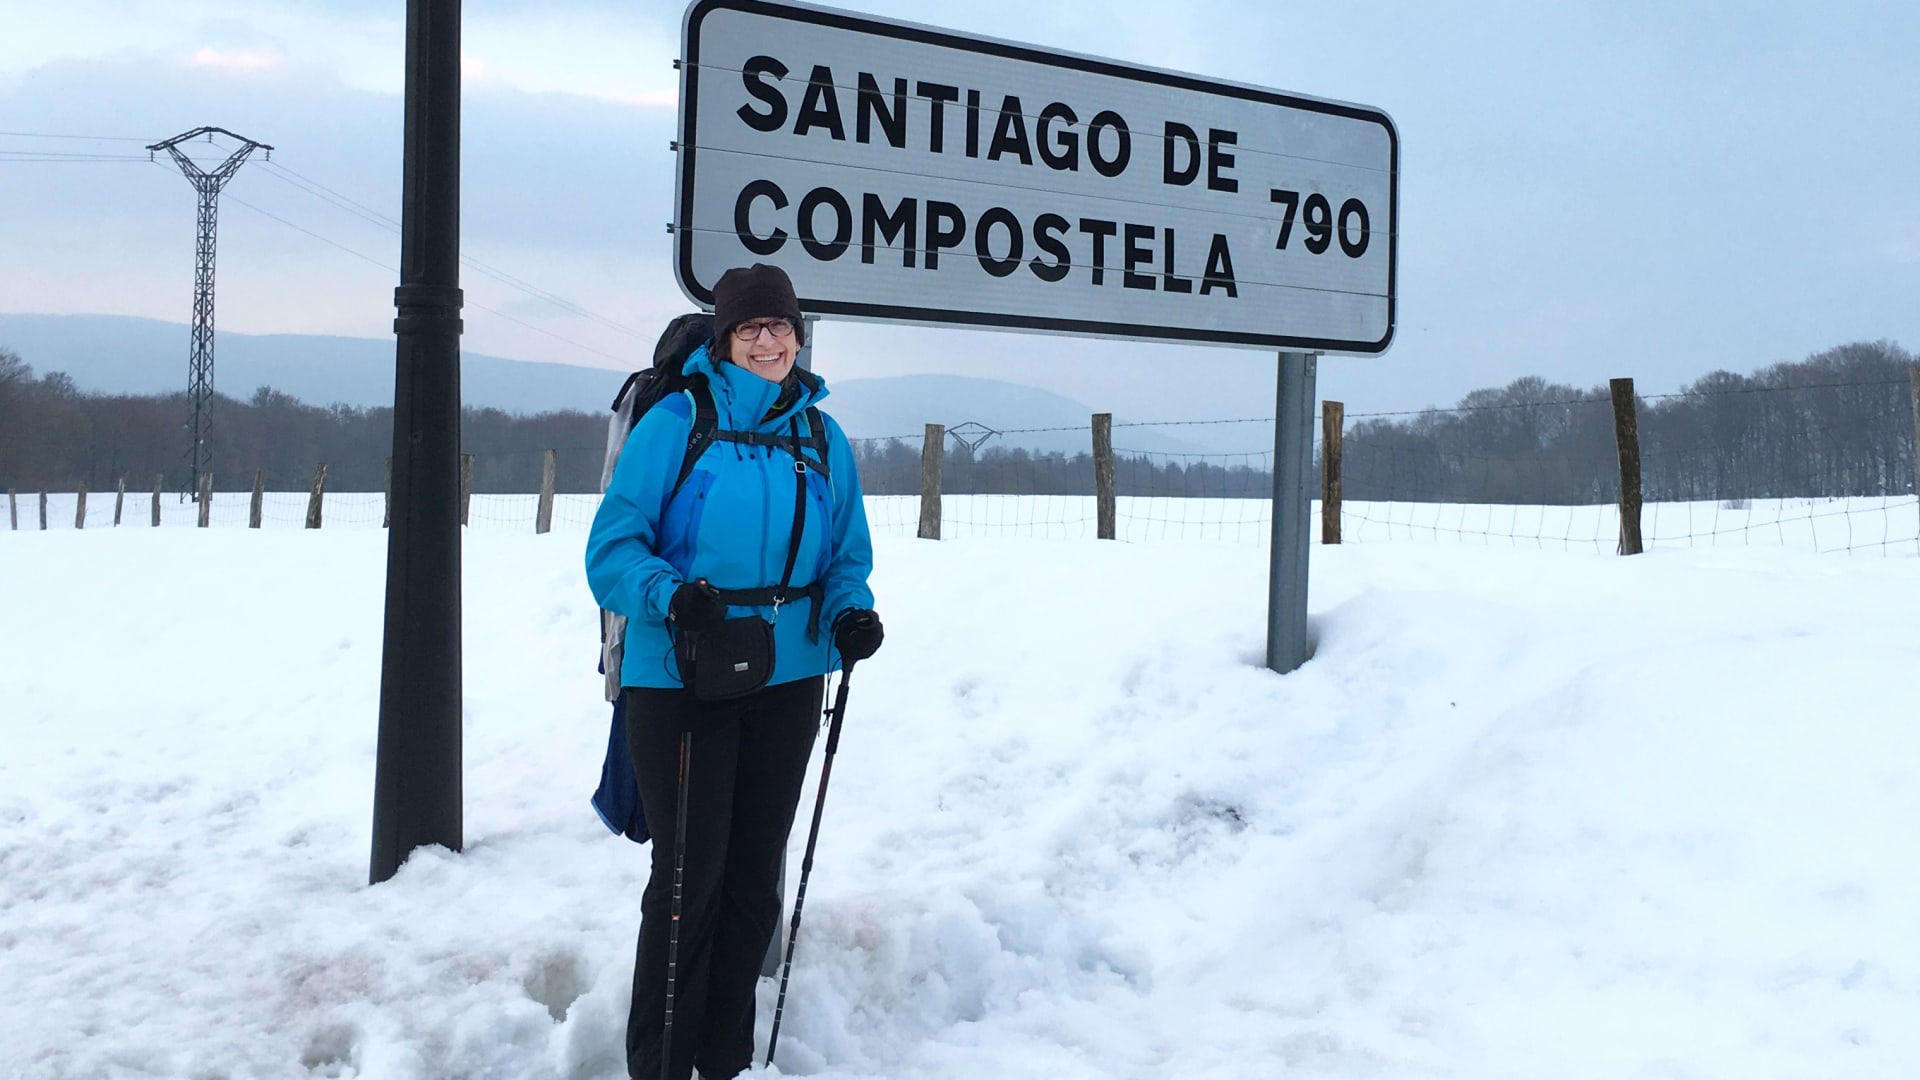 Lori McLeese, global head of human resources for Automattic, hiked the Camino de Santiago during her sabbatical in 2016.